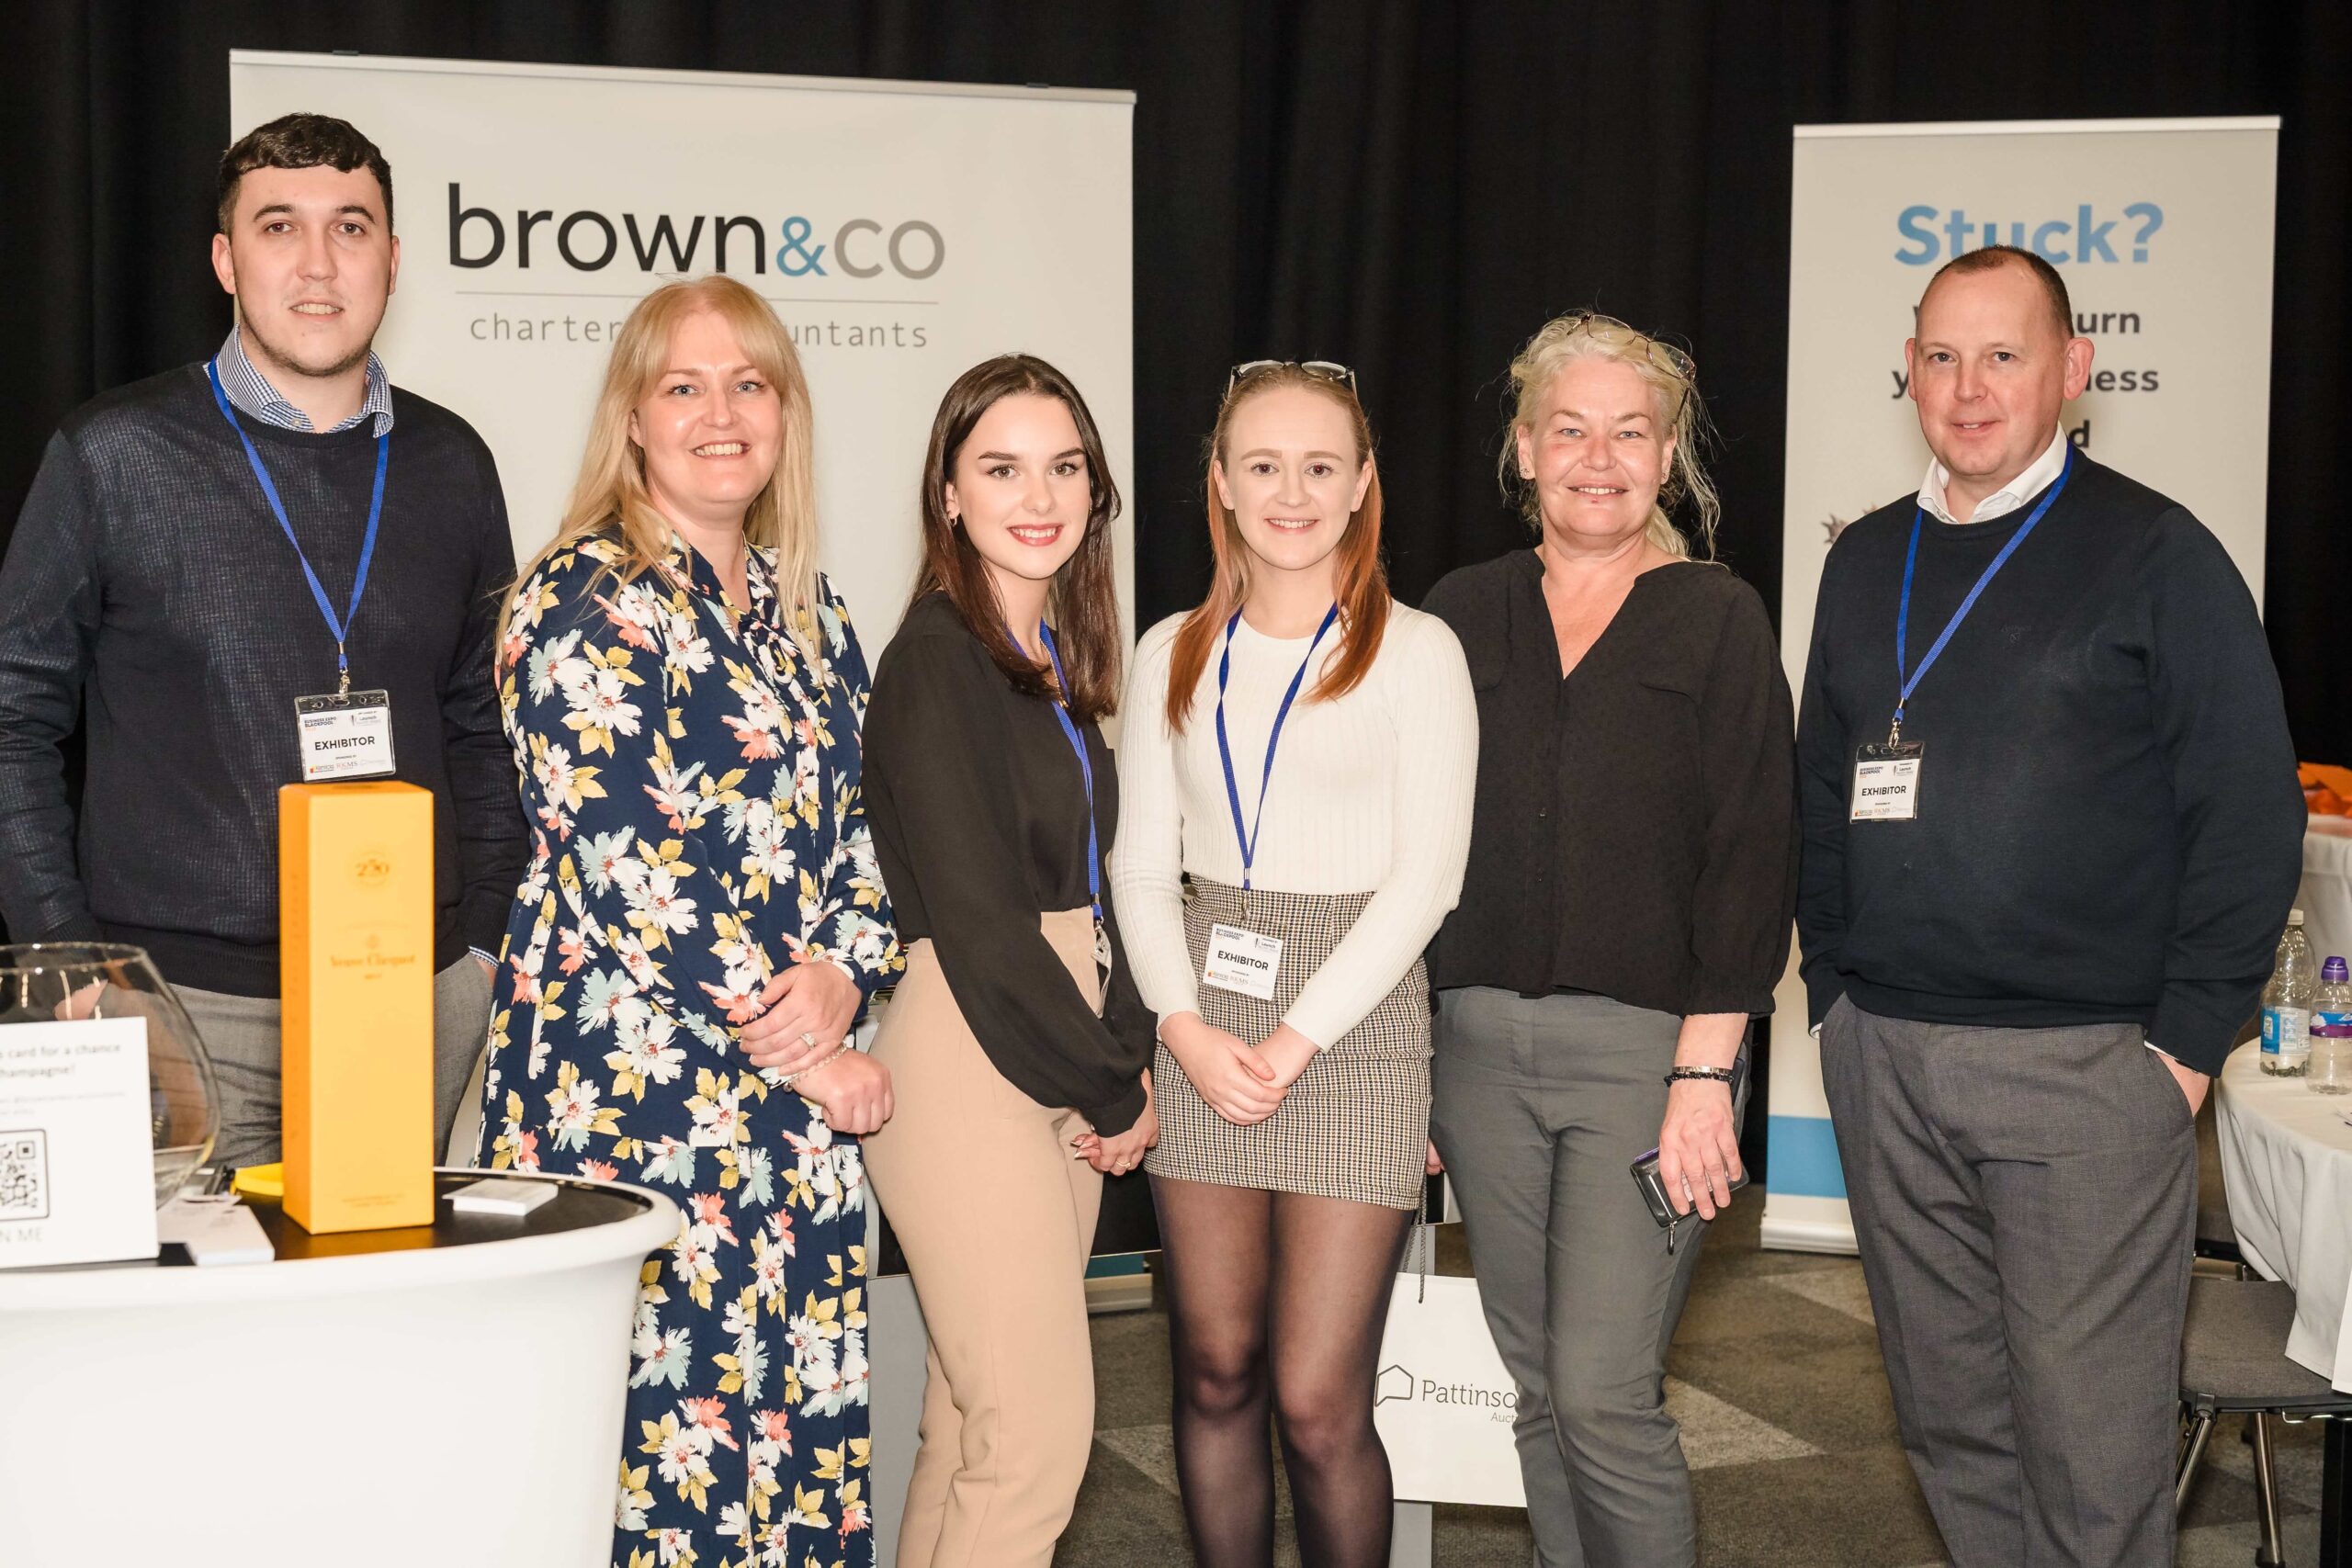 Blackpool Expo organisers pictured with the team from Brown & Co Accountants